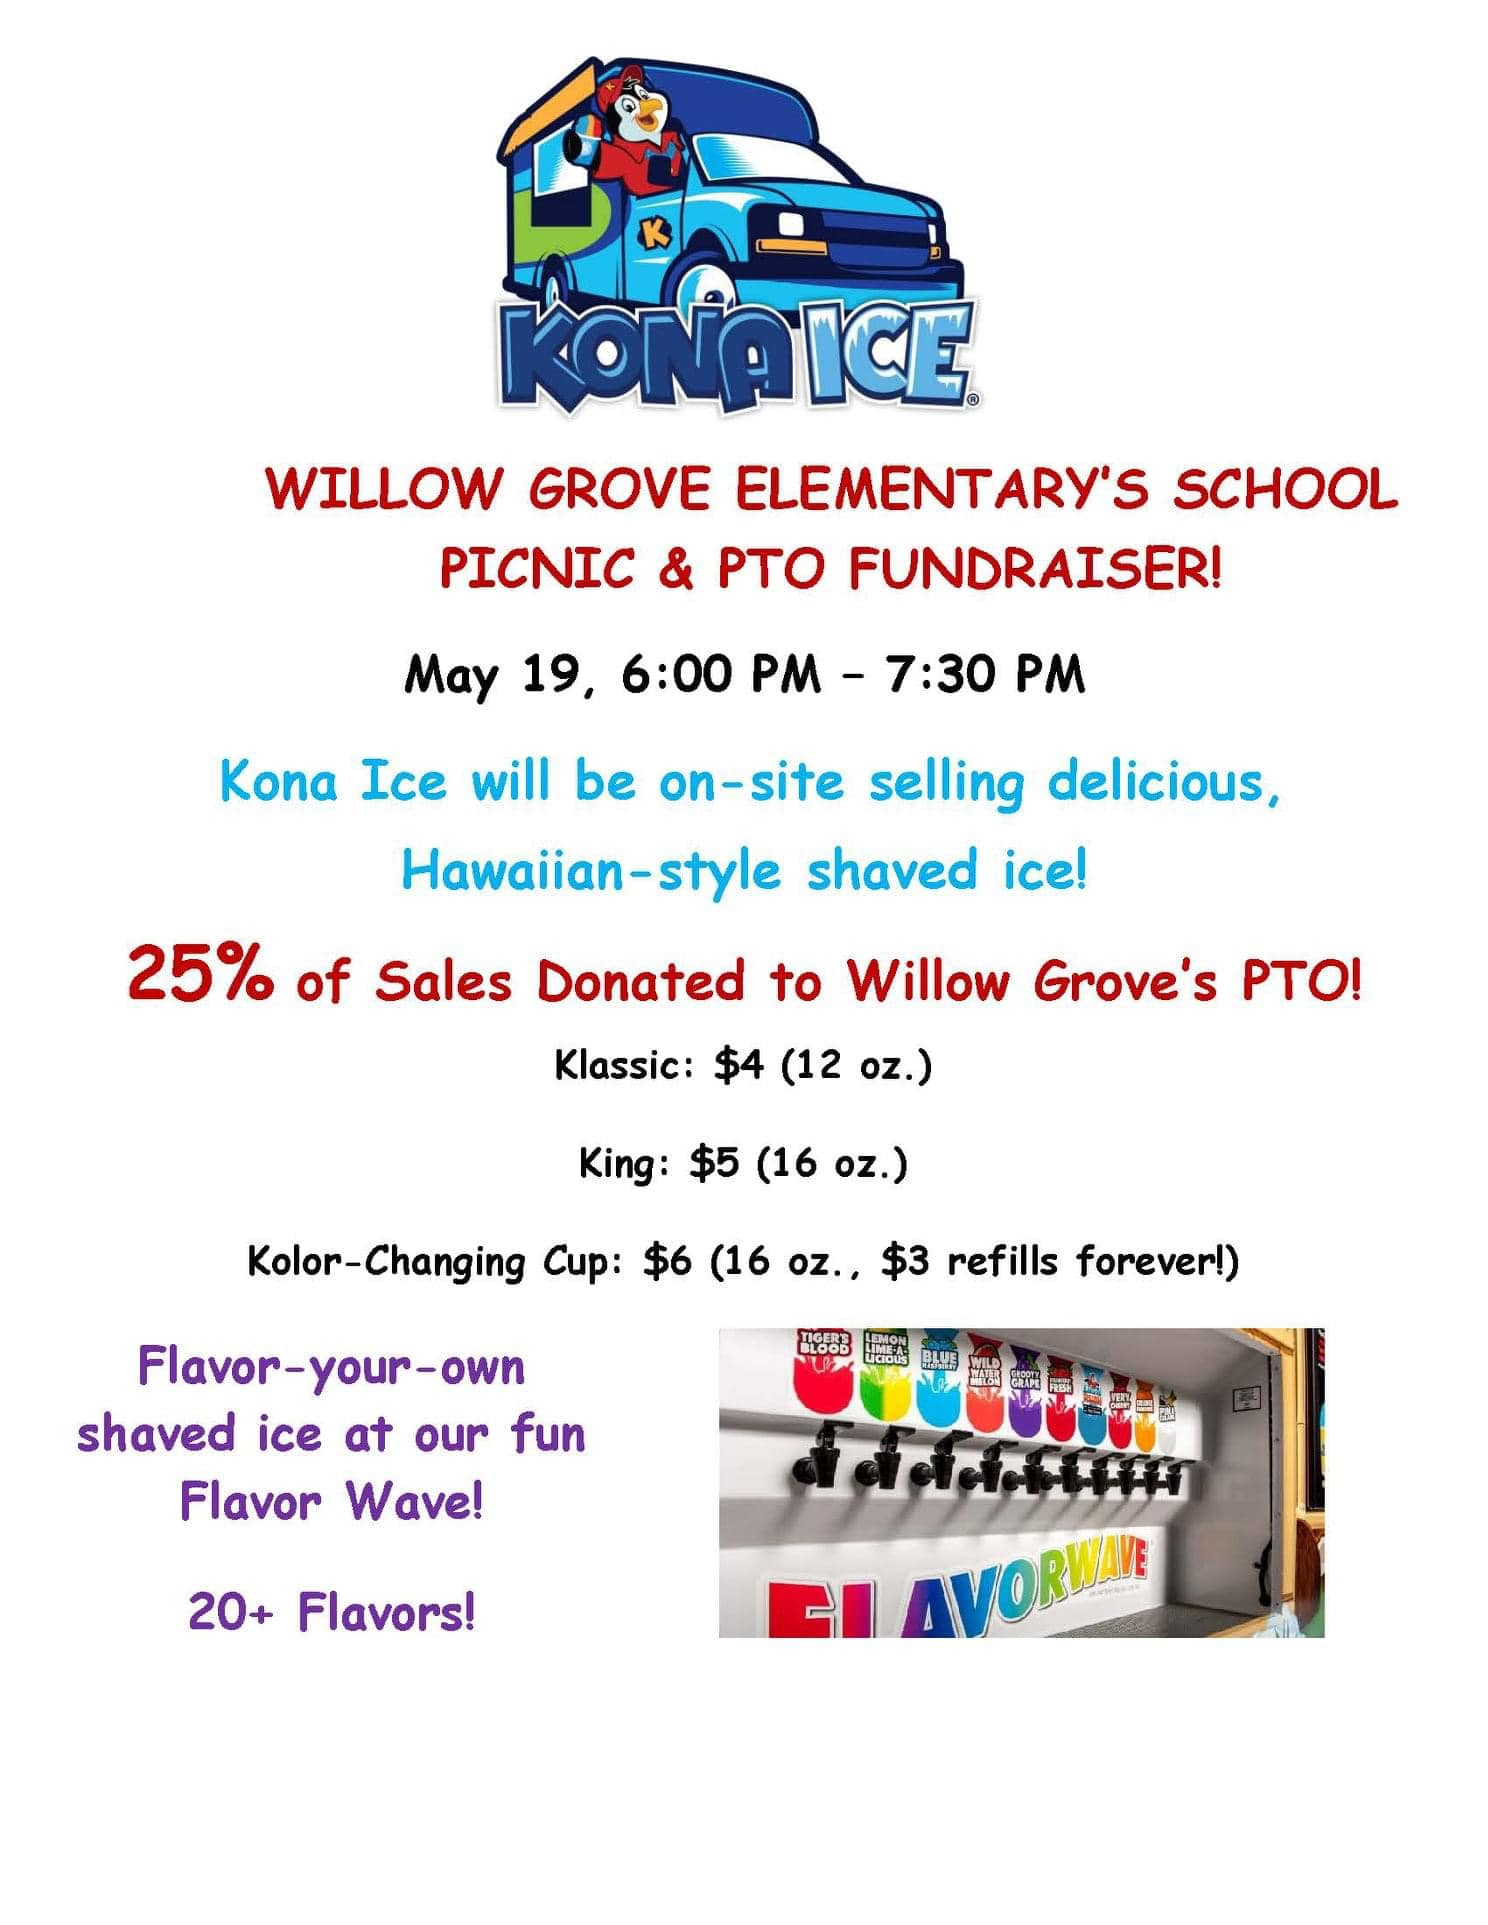 Willow Grove PTO Fundraiser, May 19 2022